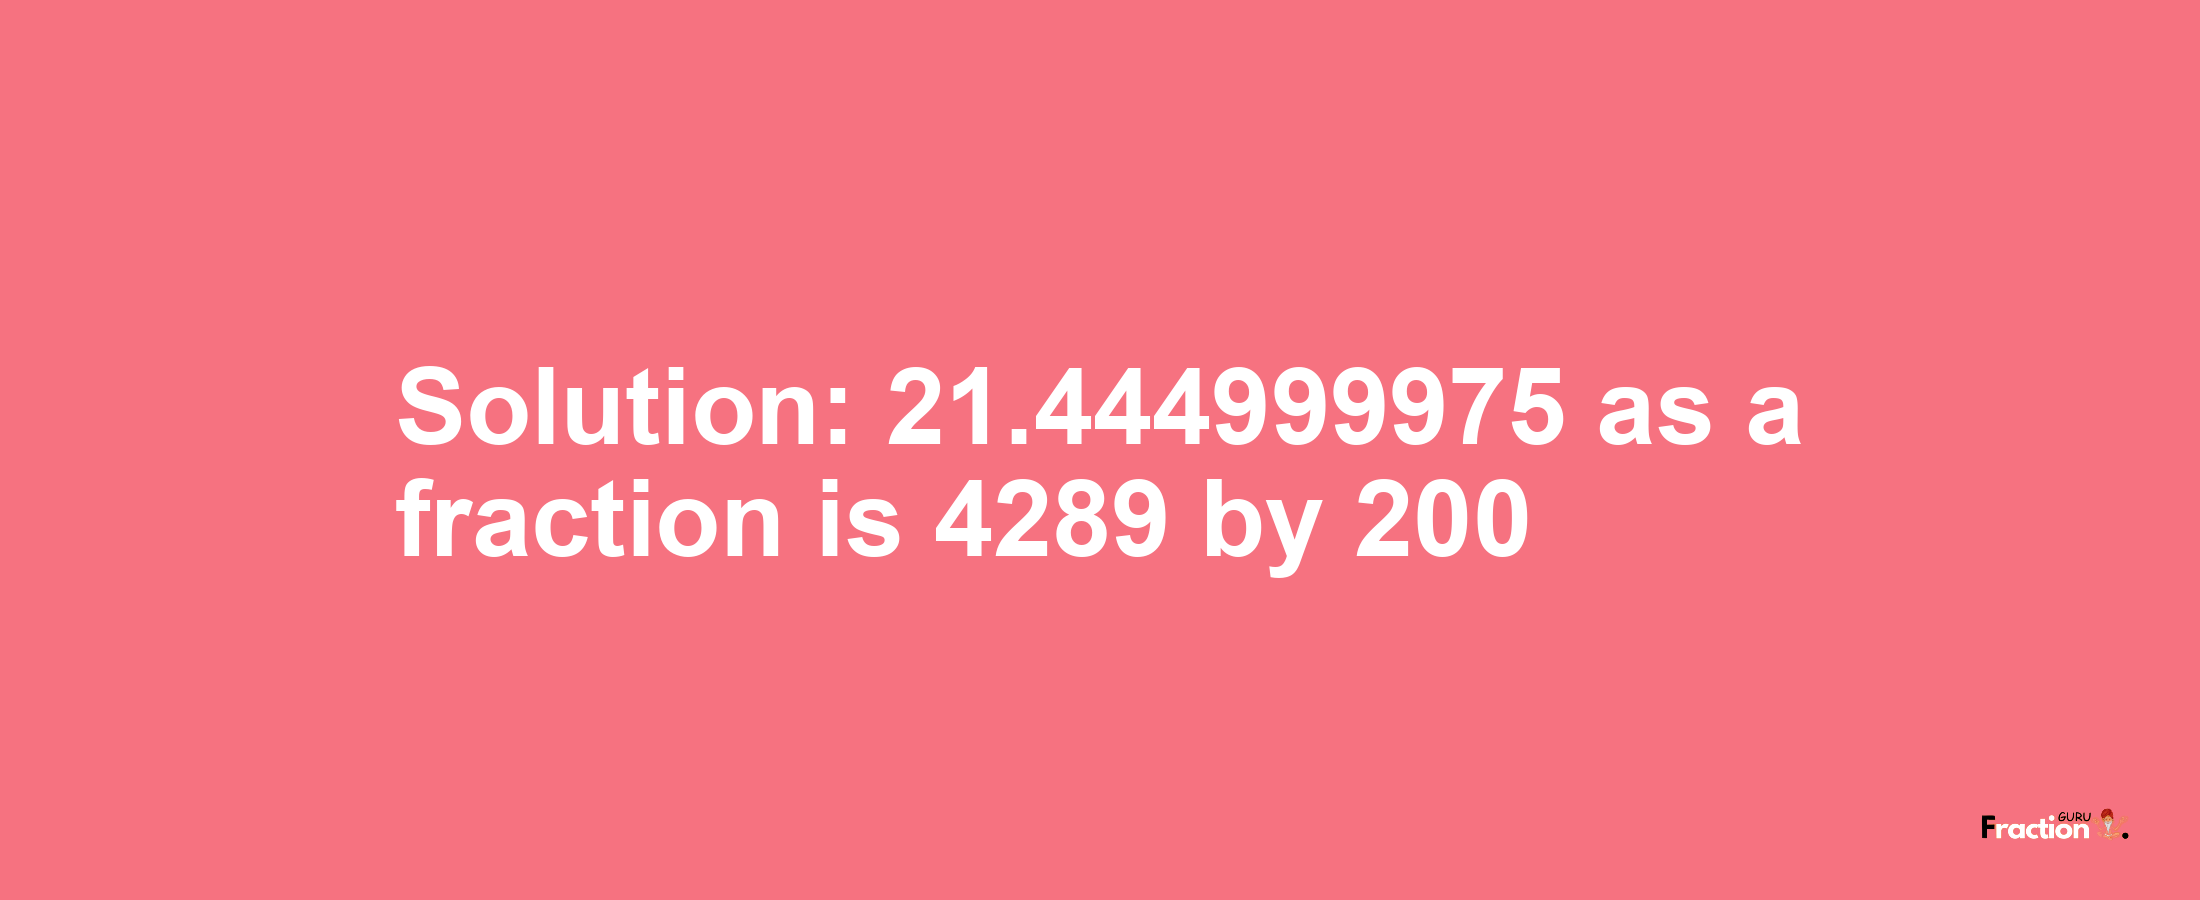 Solution:21.444999975 as a fraction is 4289/200